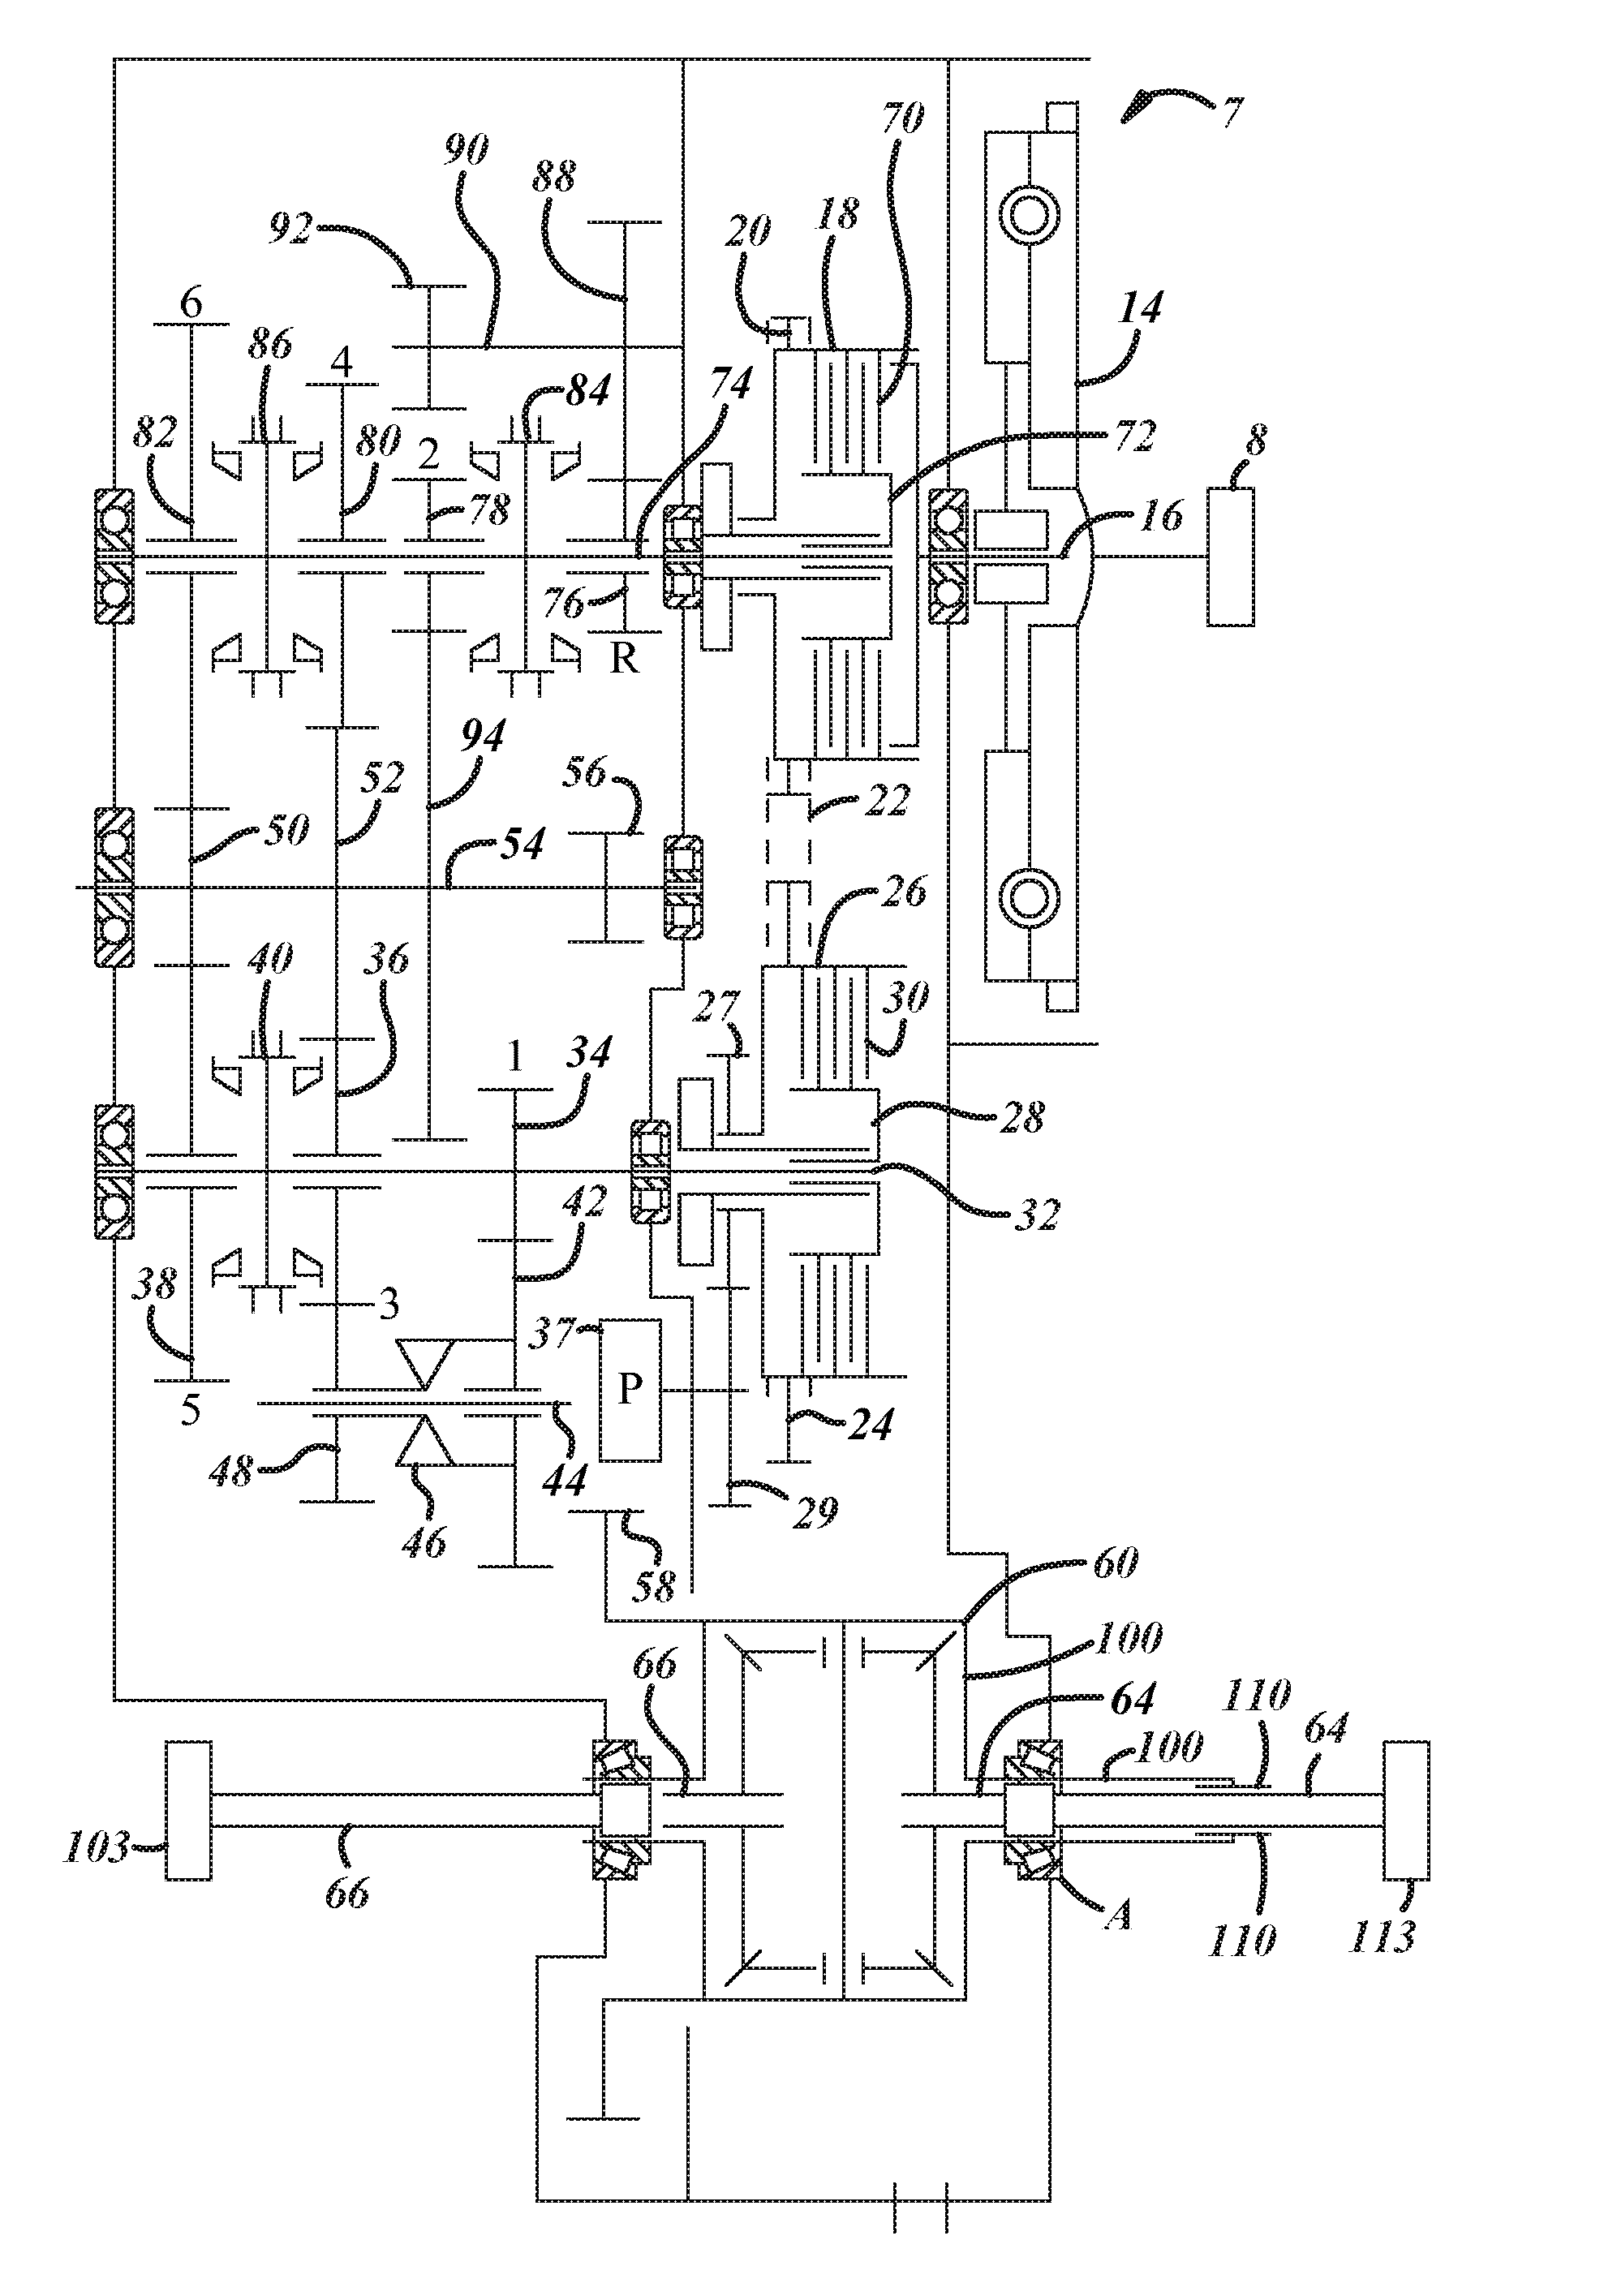 Power transfer unit (PTU) assembly with hydraulically actuated disconnect rear output shaft